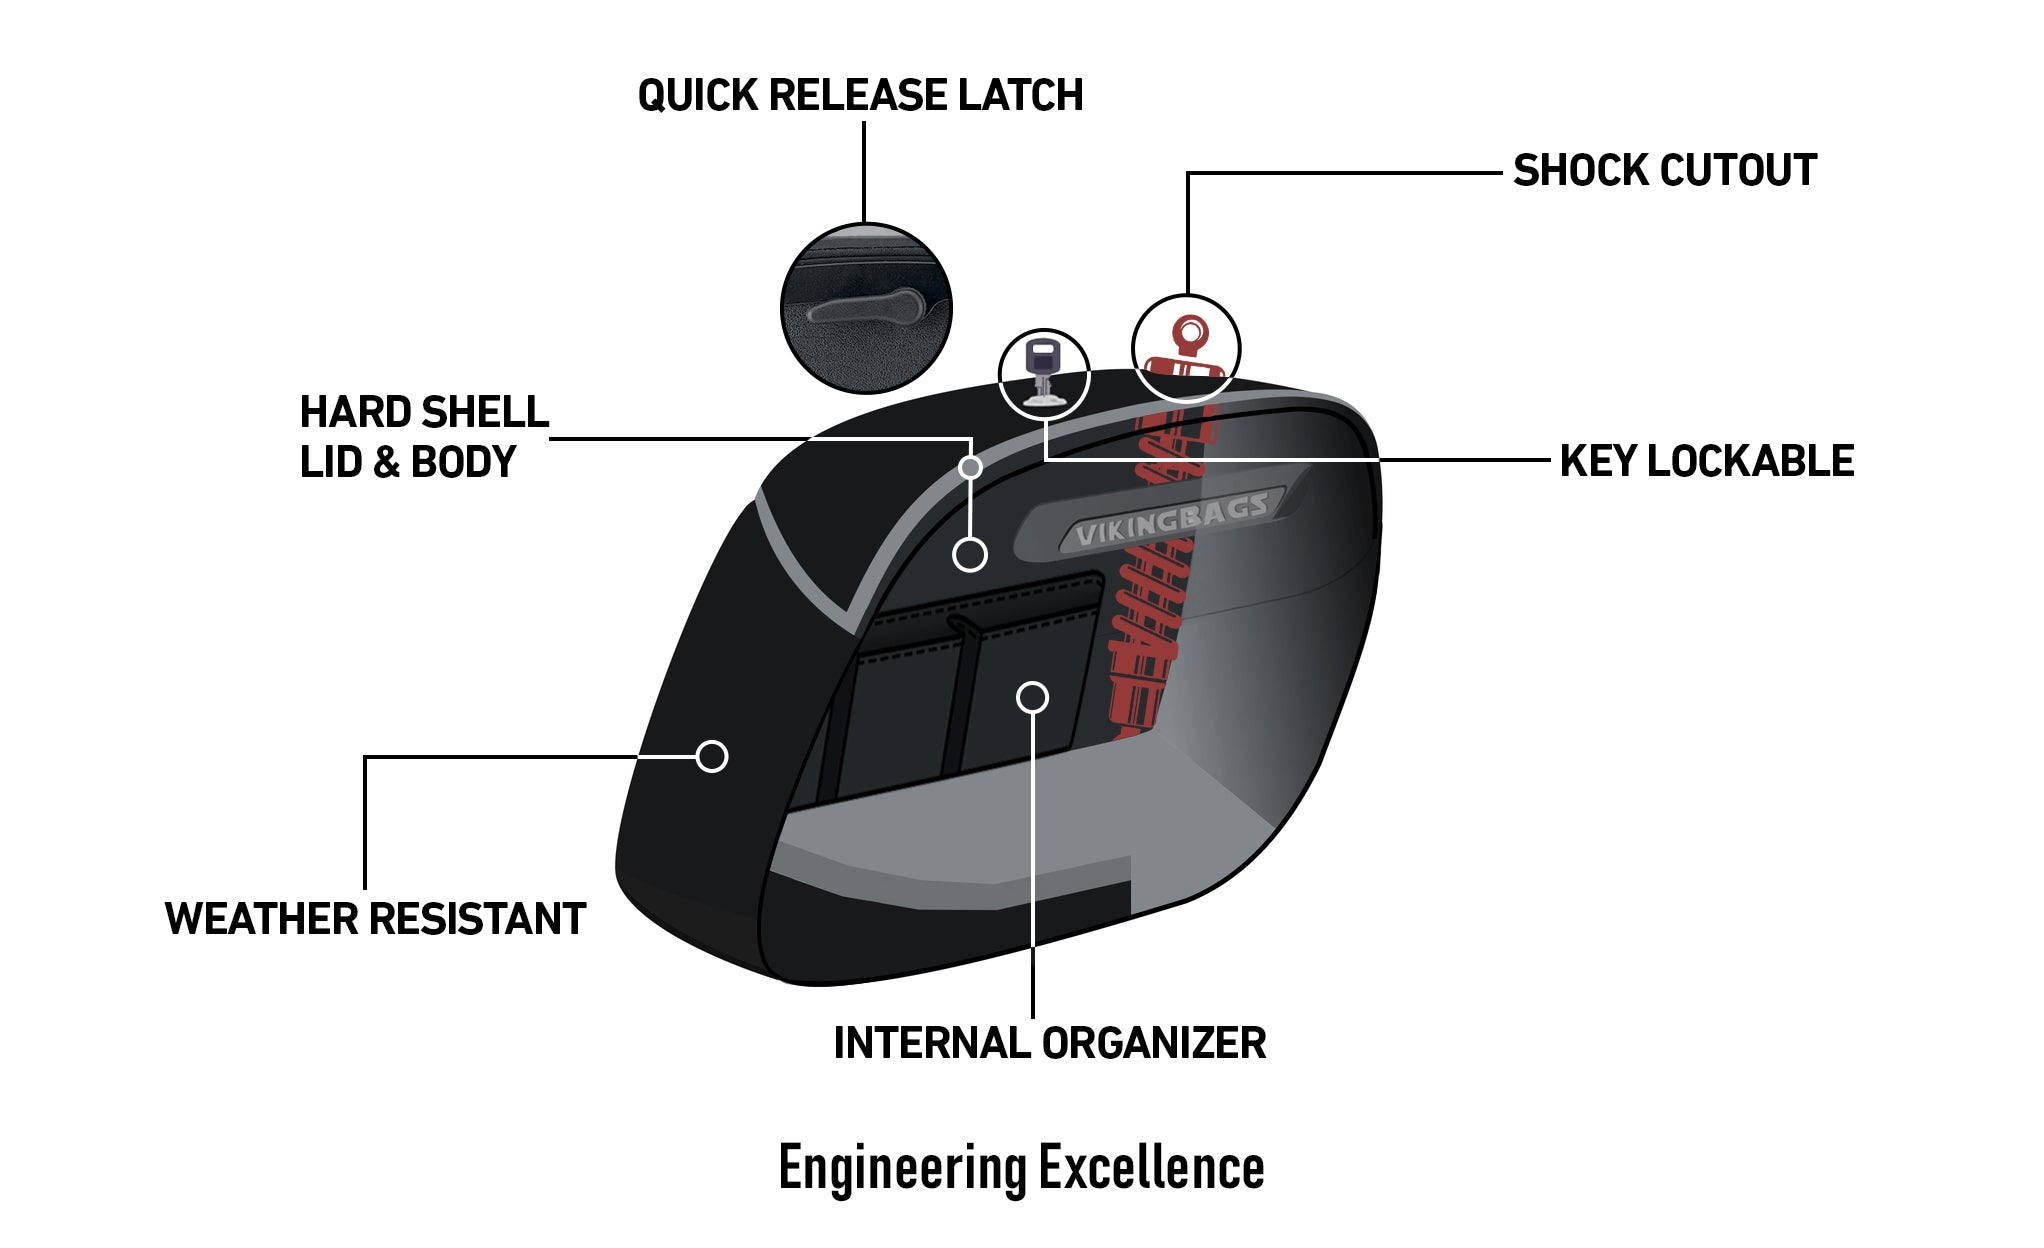 Viking Lamellar Raven Extra Large Shock Cutout Matte Hard Saddlebags For Harley Dyna Fat Bob Fxdf Se Engineering Excellence with Bag on Bike @expand